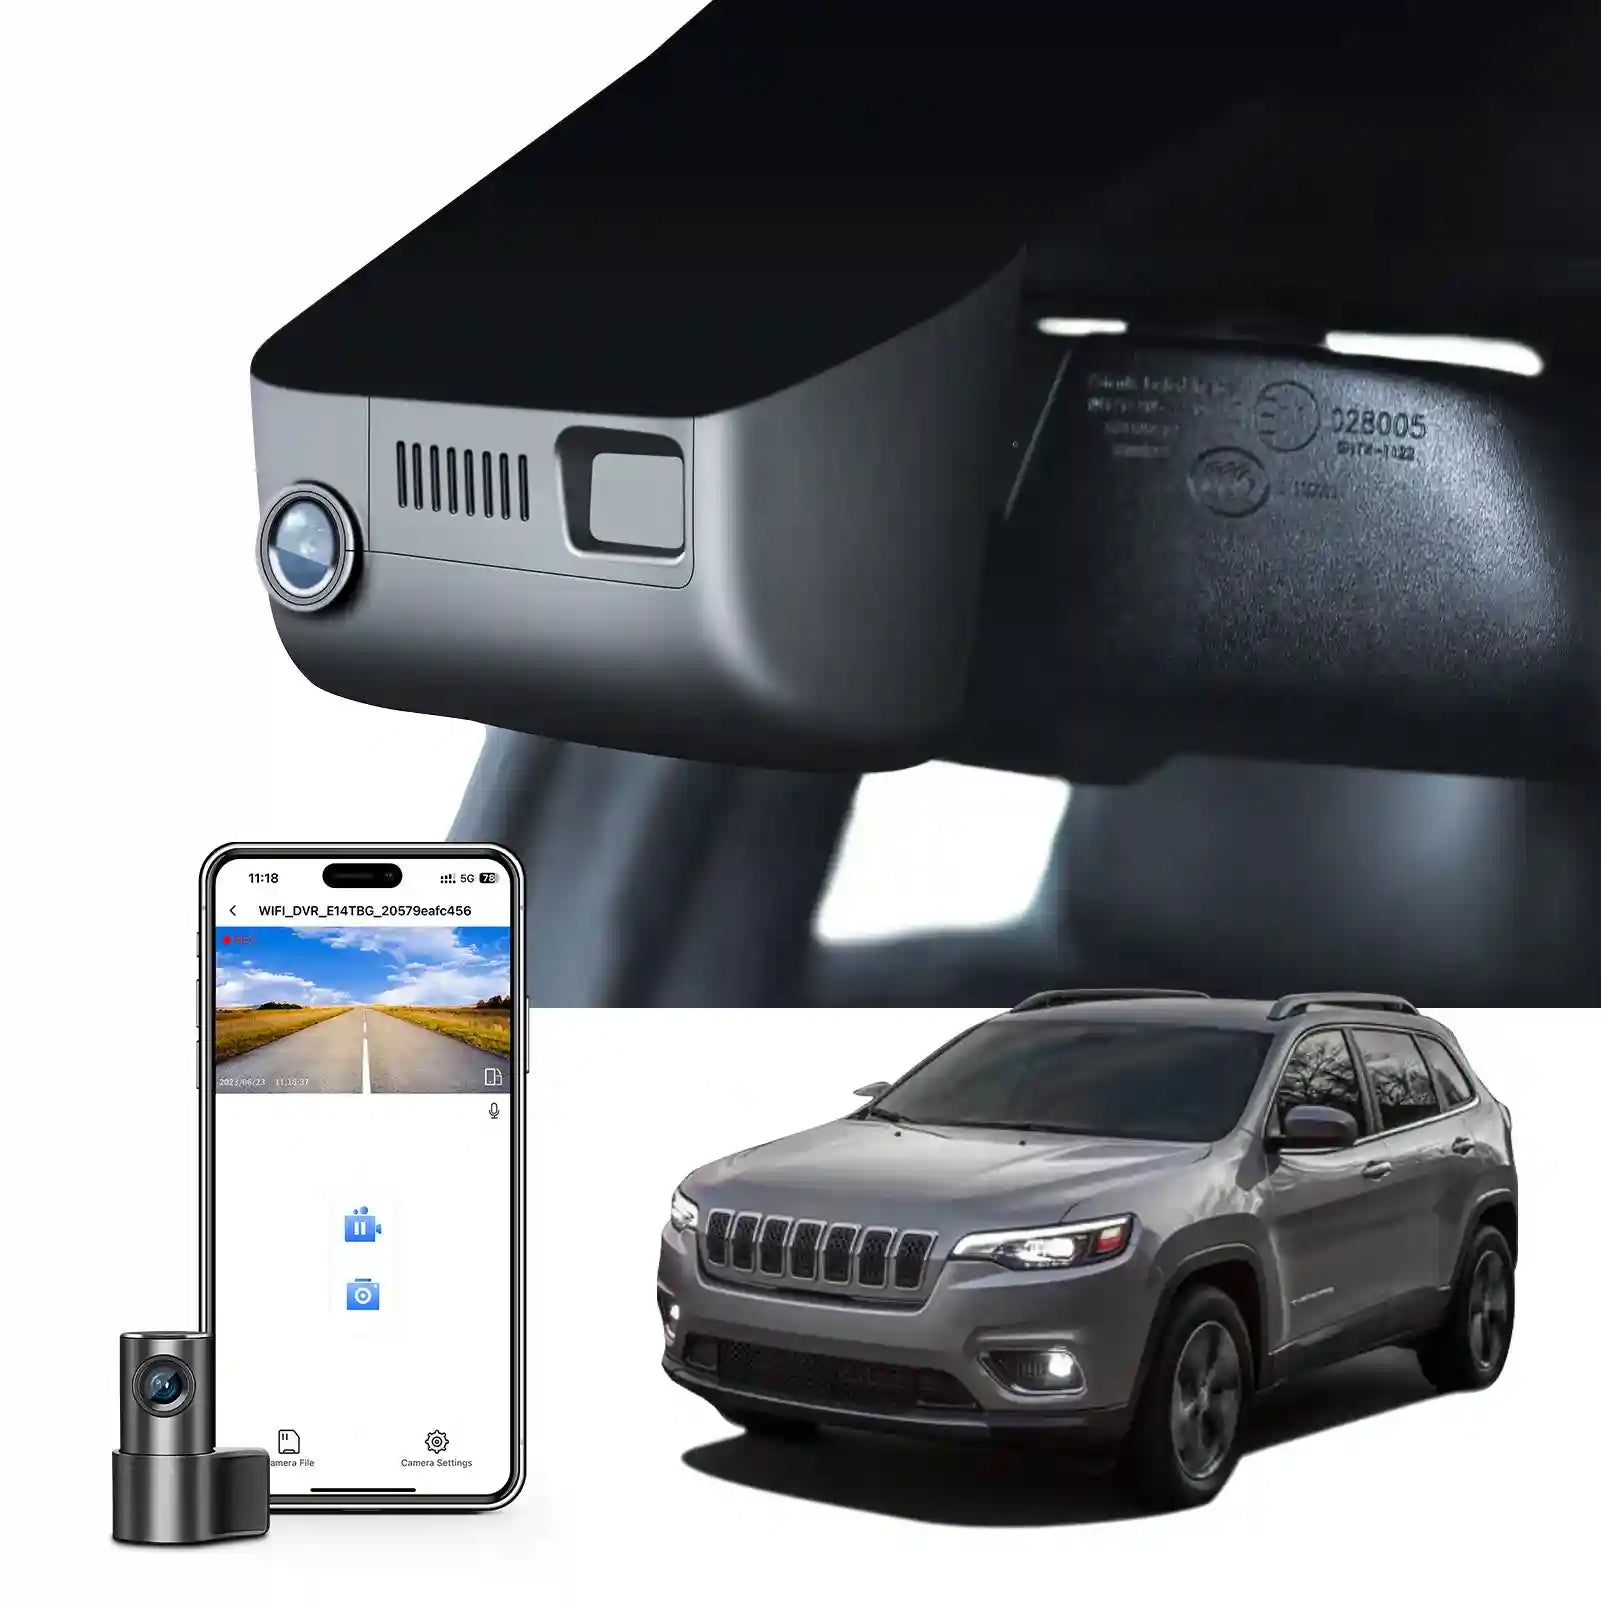 Mangoal Front 4K & Rear 1080P Dash Cam Fit for Jeep 5th Gen Cherokee 2014-2018 KL (Model B), Latitude Altitude Limited,UHD 2160P Video,OEM Look, Built-in WiFi,Easy to Install, Free App and 128GB Card